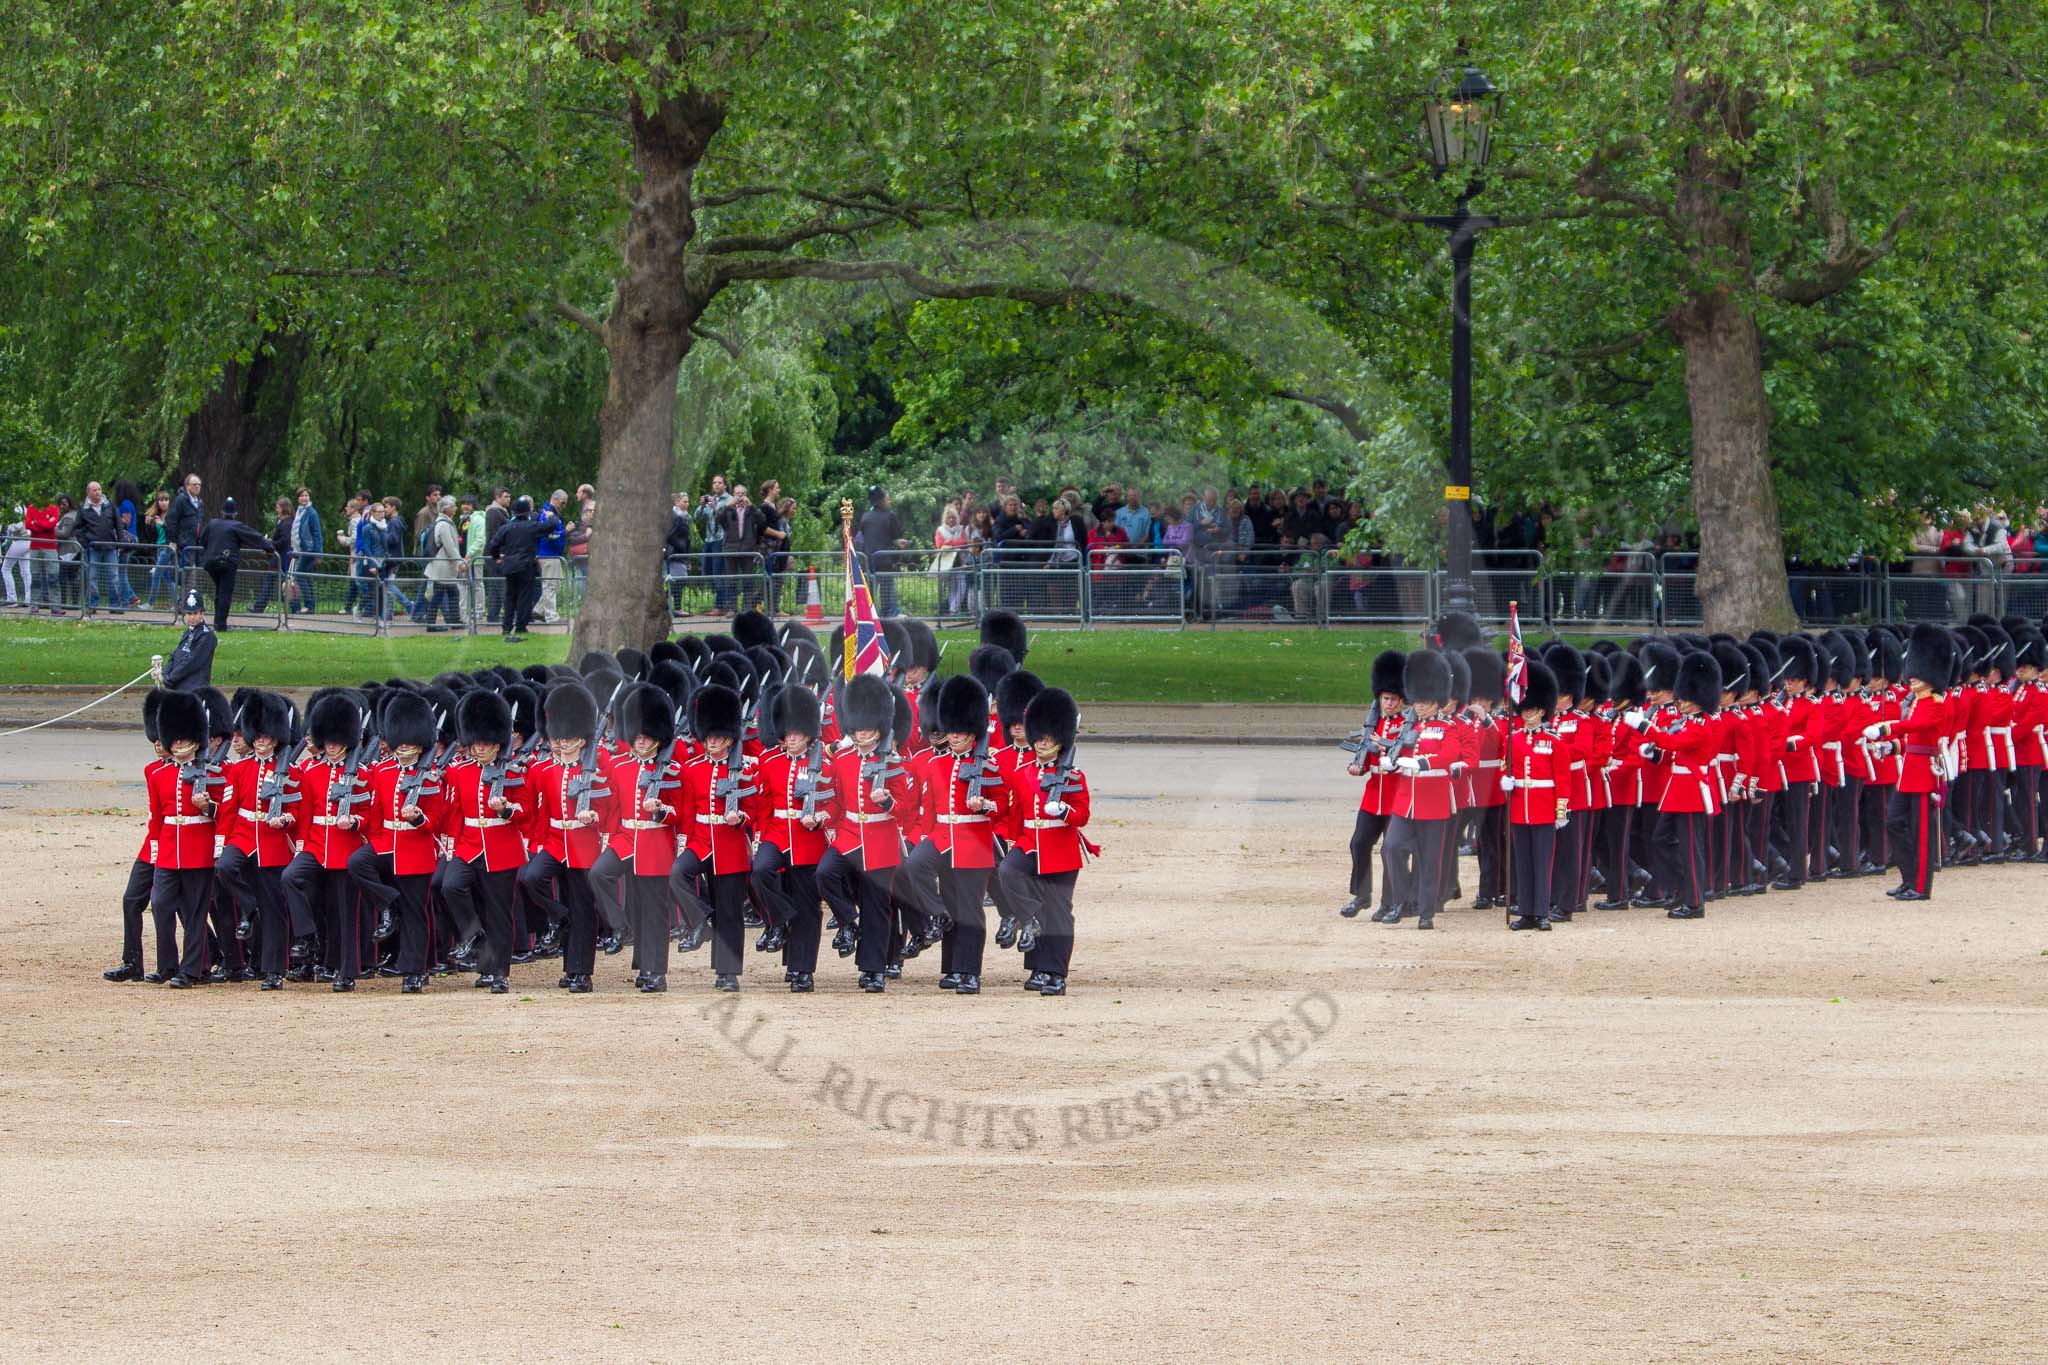 The Colonel's Review 2012: No. 1 Guard (Escort for the Colour), 1st Battalion Coldstream Guards, and No. 2 Guard, 1st Battalion Coldstream Guards, during the March Past..
Horse Guards Parade, Westminster,
London SW1,

United Kingdom,
on 09 June 2012 at 11:40, image #330